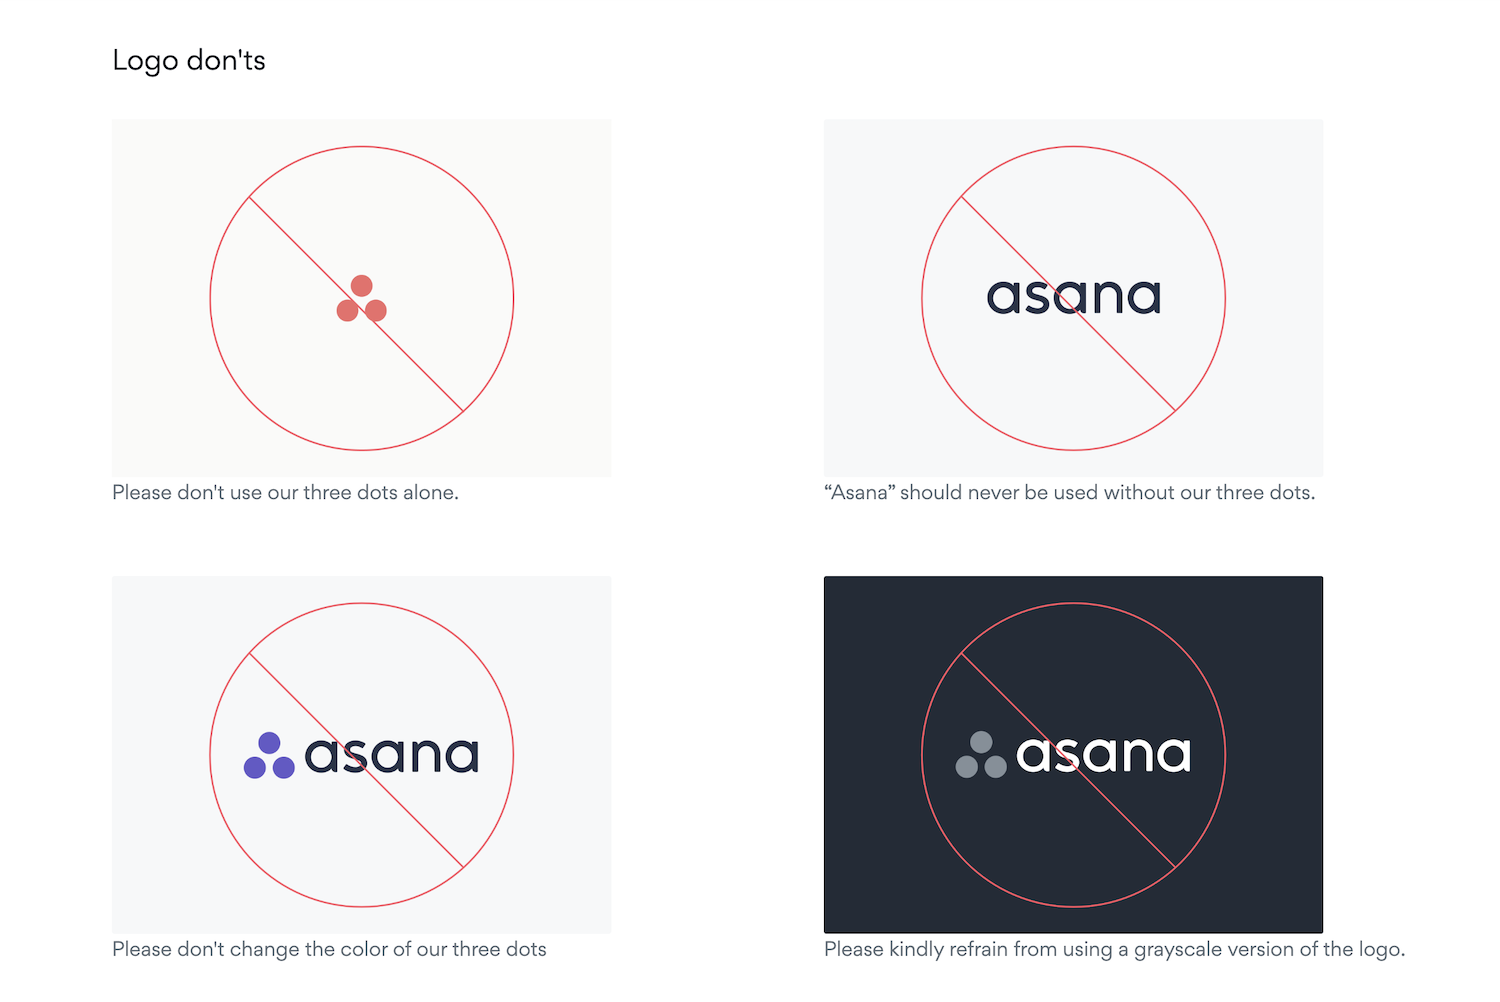 Asana brand's style guide includes a section on unauthorized logo modification practices online.